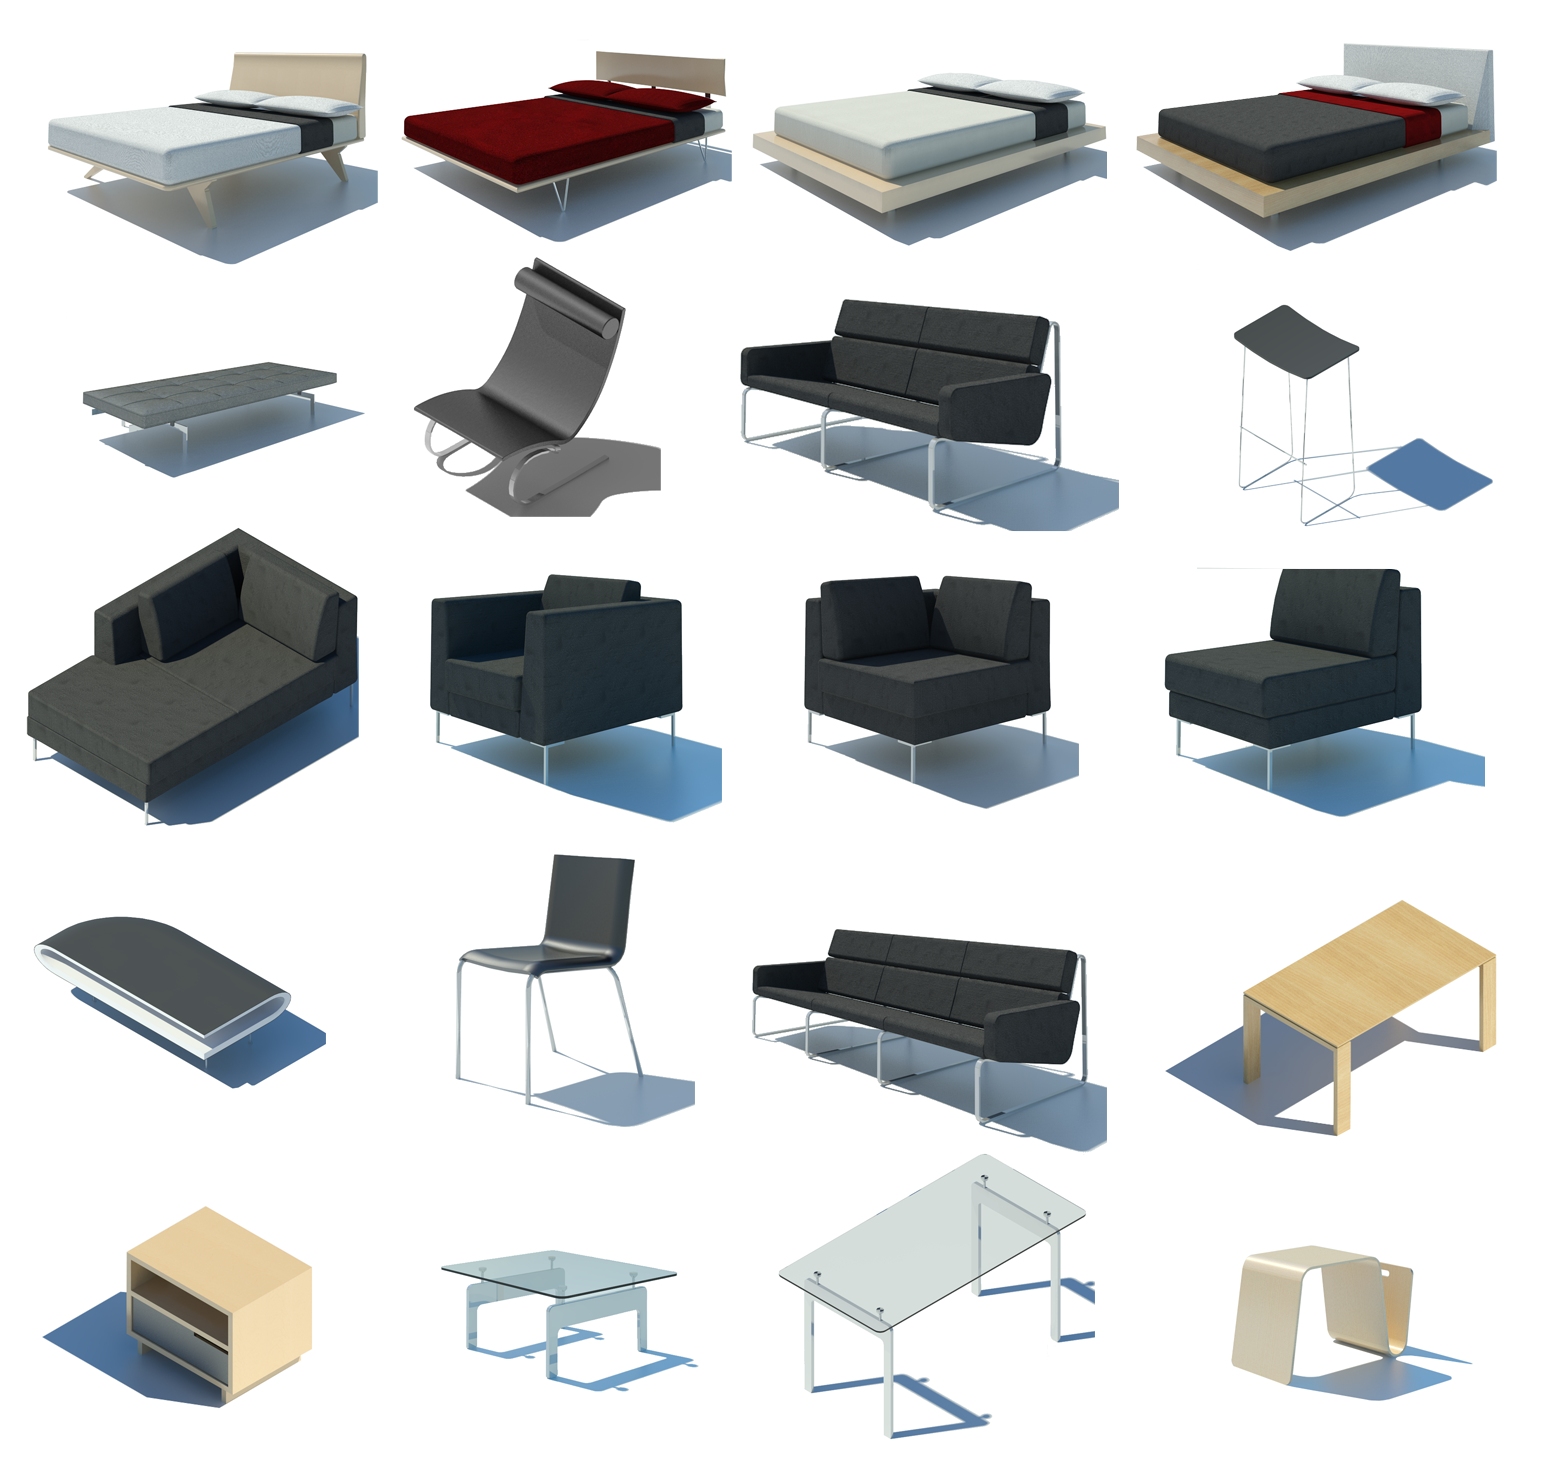 autodesk revit family library download